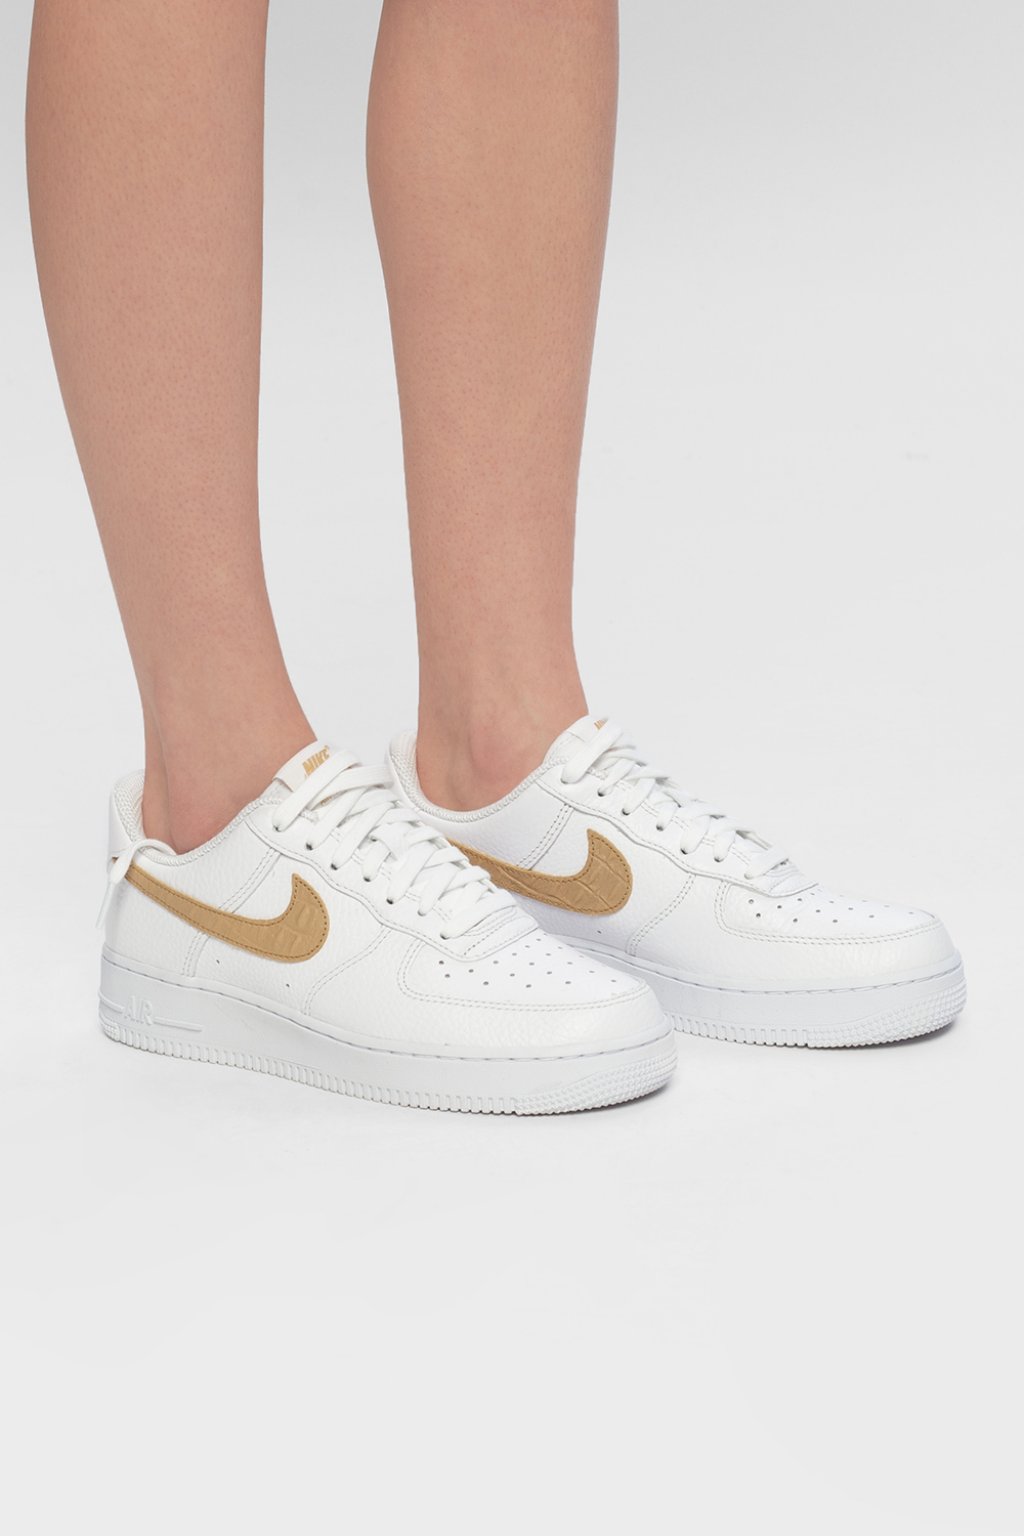 all white air force 1 lv8 low top